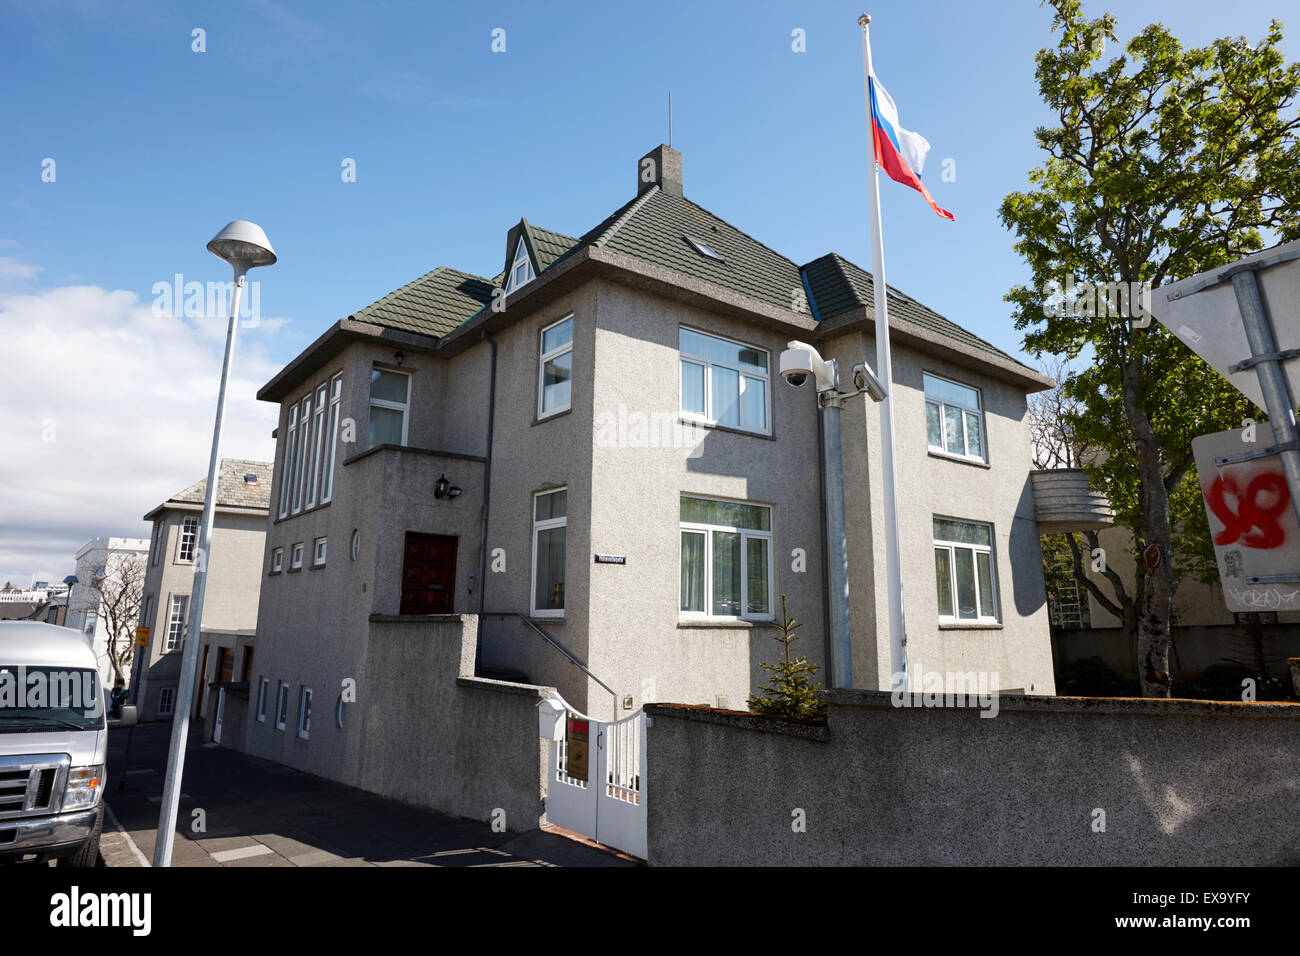 Embassy Consulate High Resolution Stock Photography and Images - Alamy